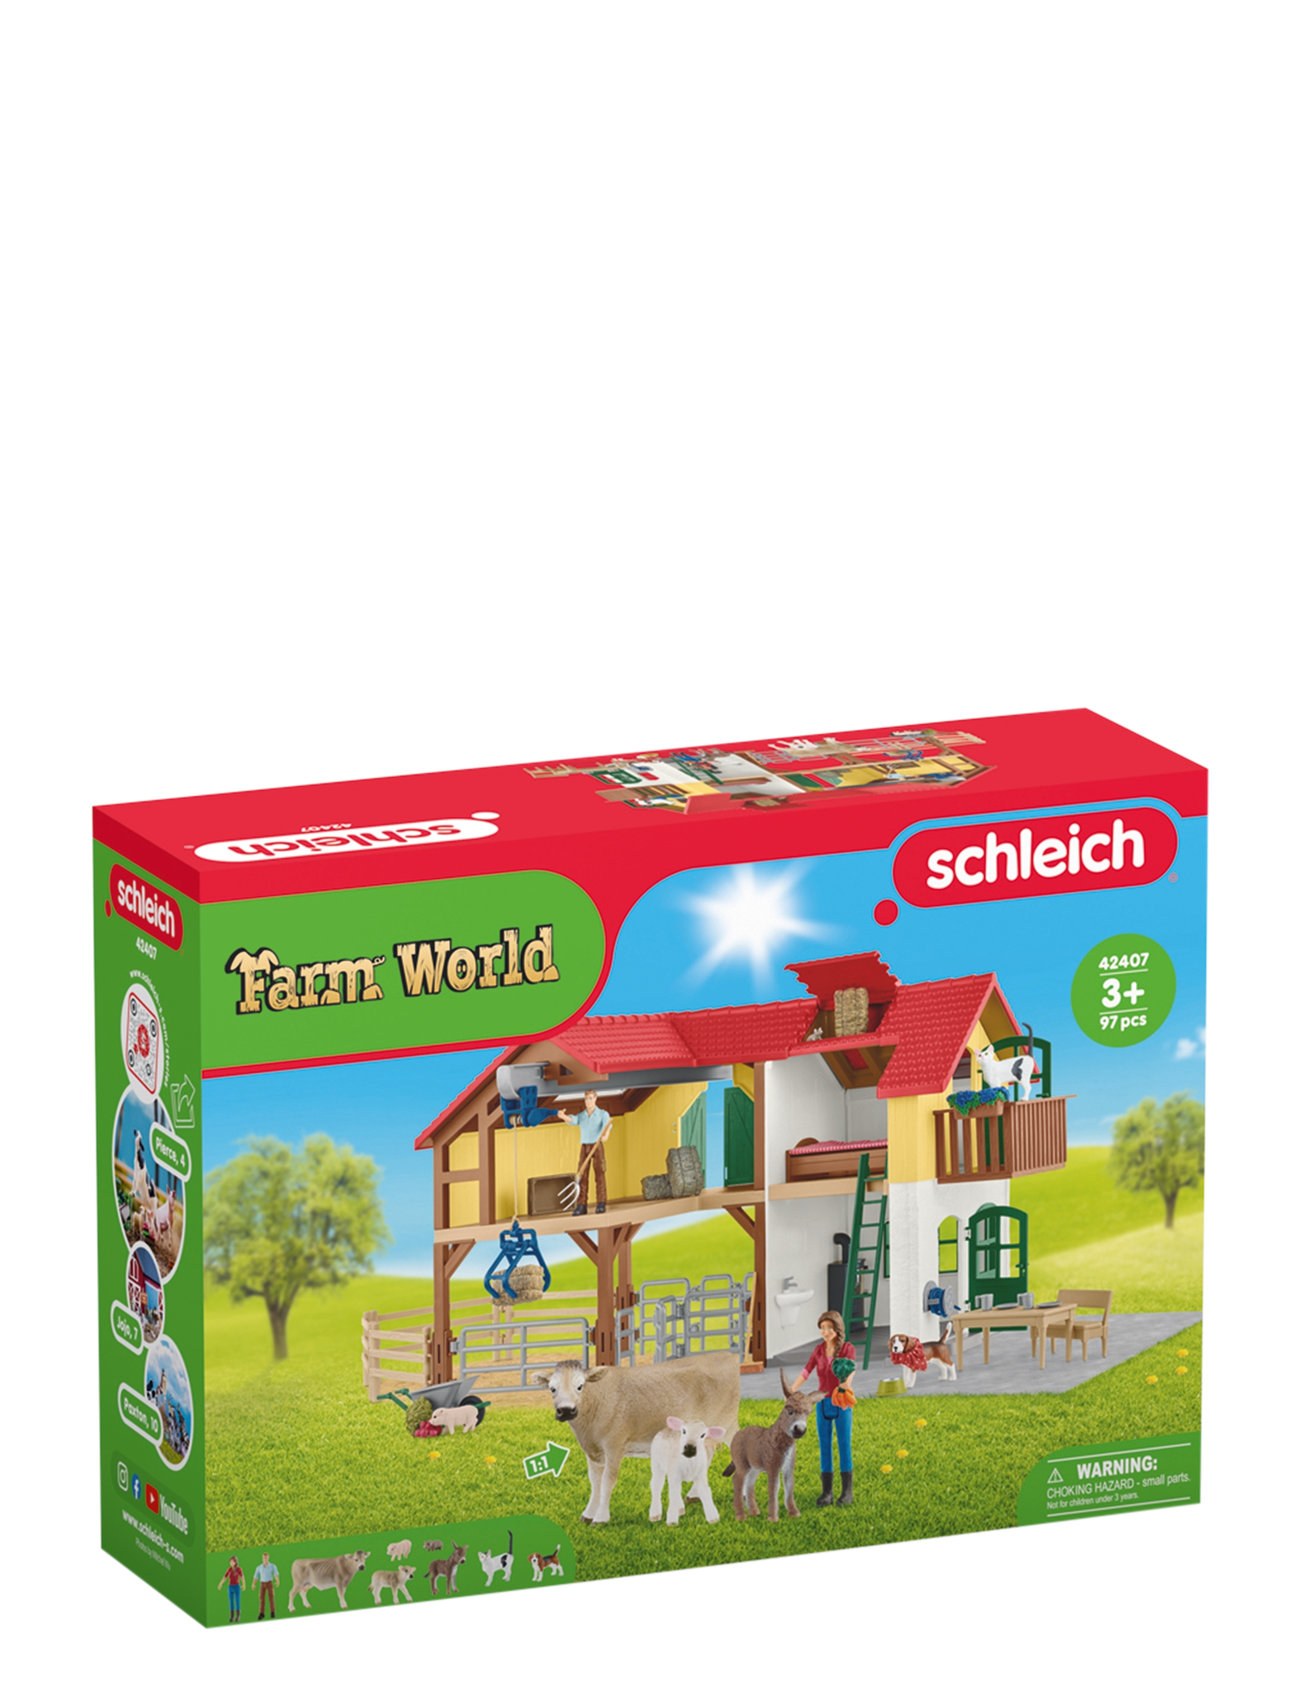 Schleich Large Farm House Toys Playsets & Action Figures Play Sets Multi/patterned Schleich